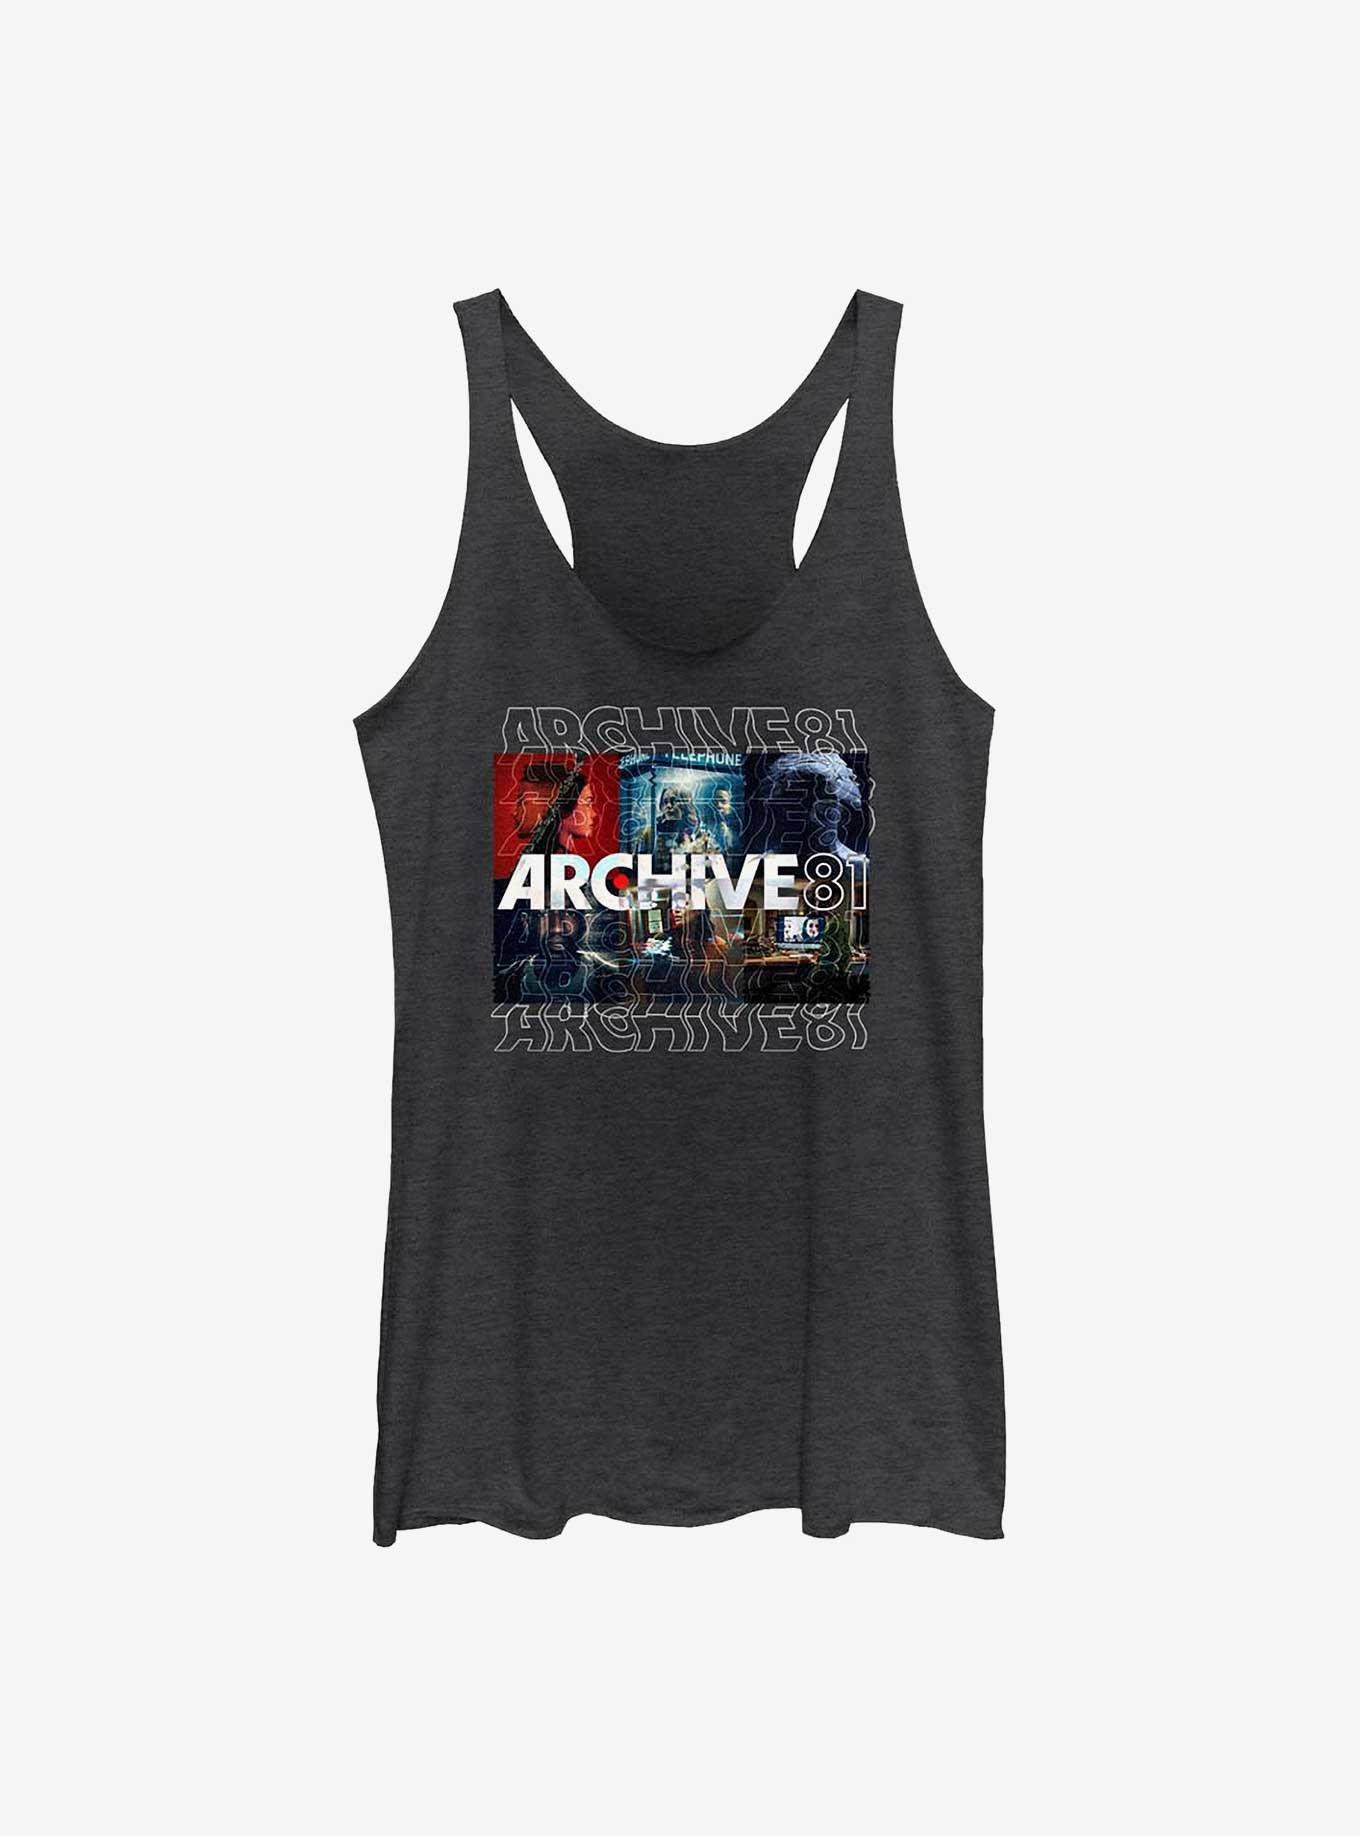 Archive 81 Poster Boxup Girls Tank